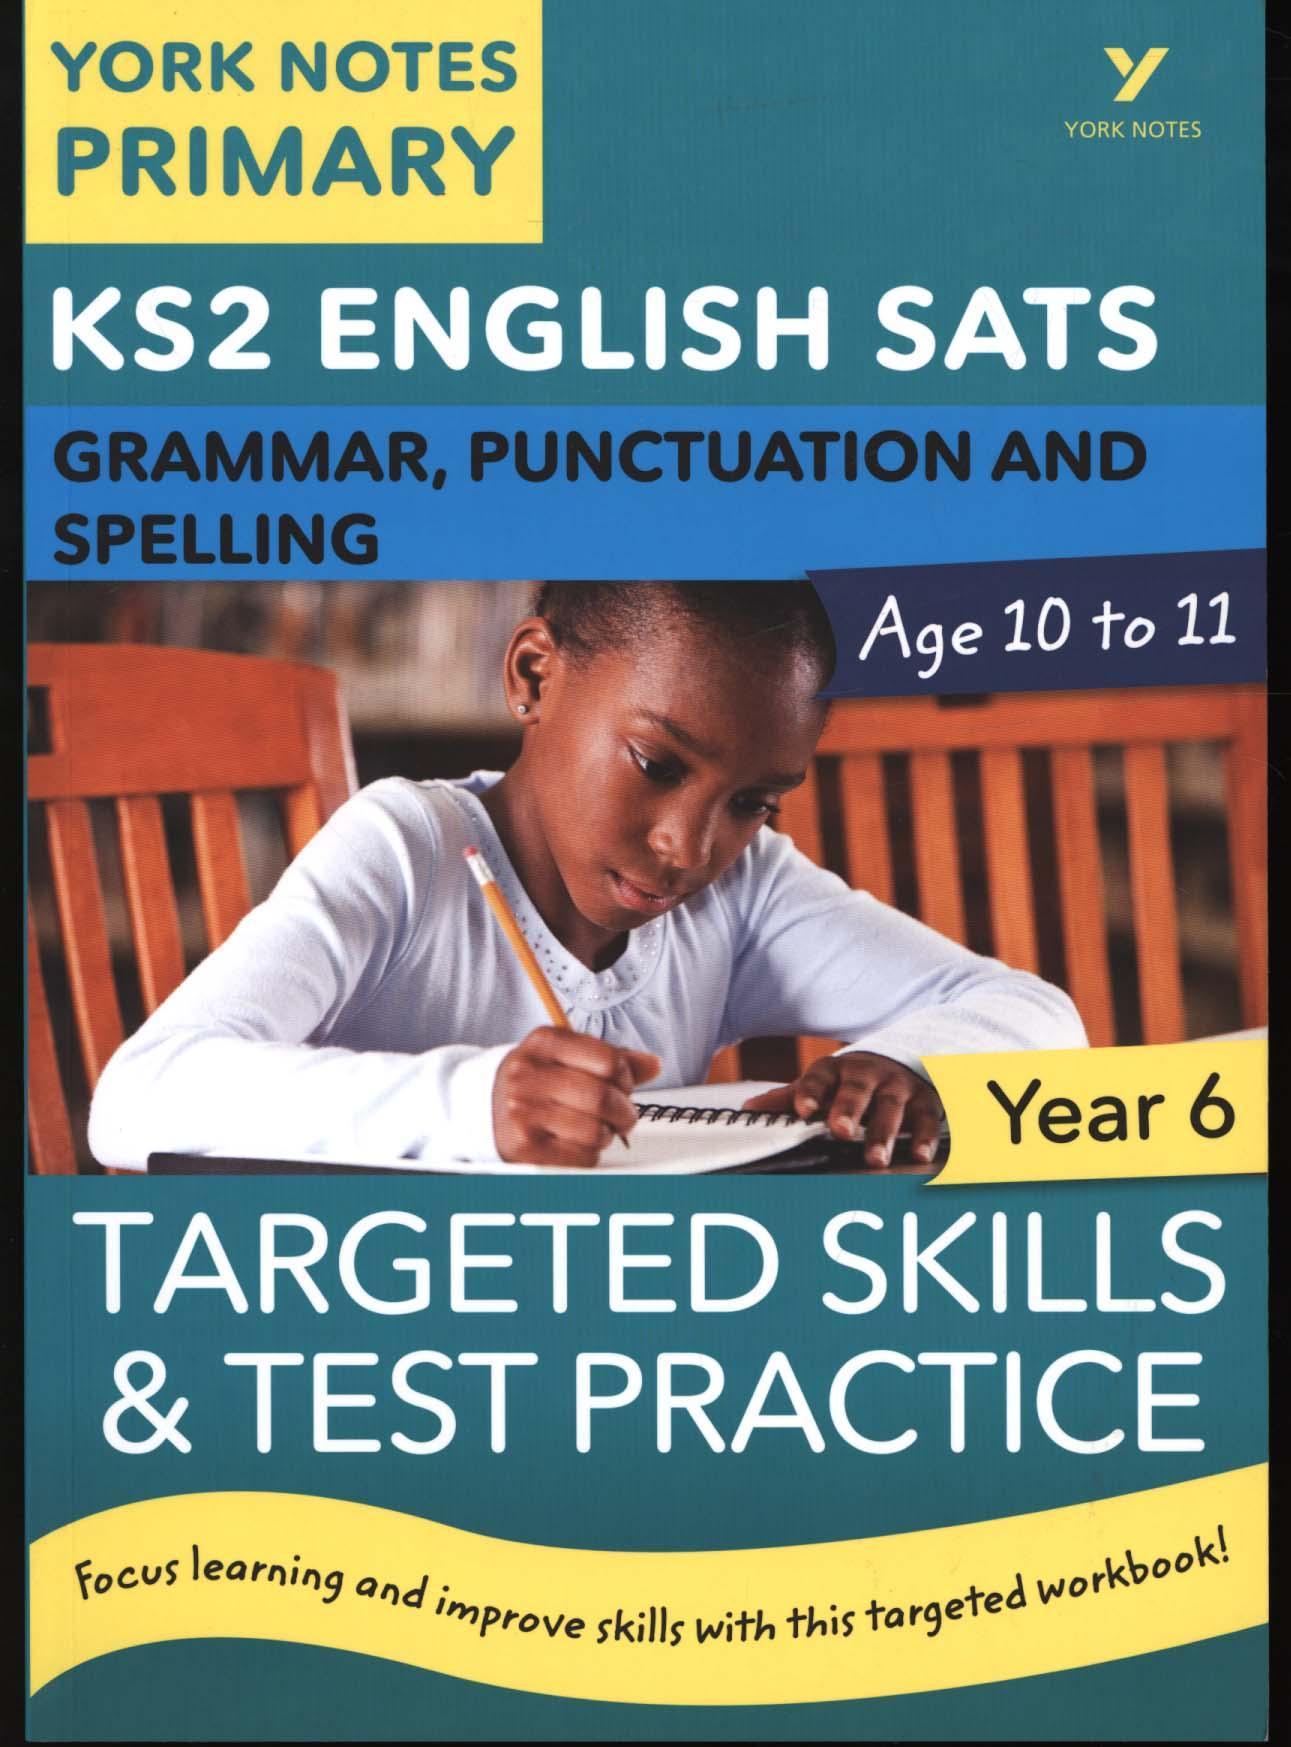 English SATs Grammar, Punctuation and Spelling Targeted Skil